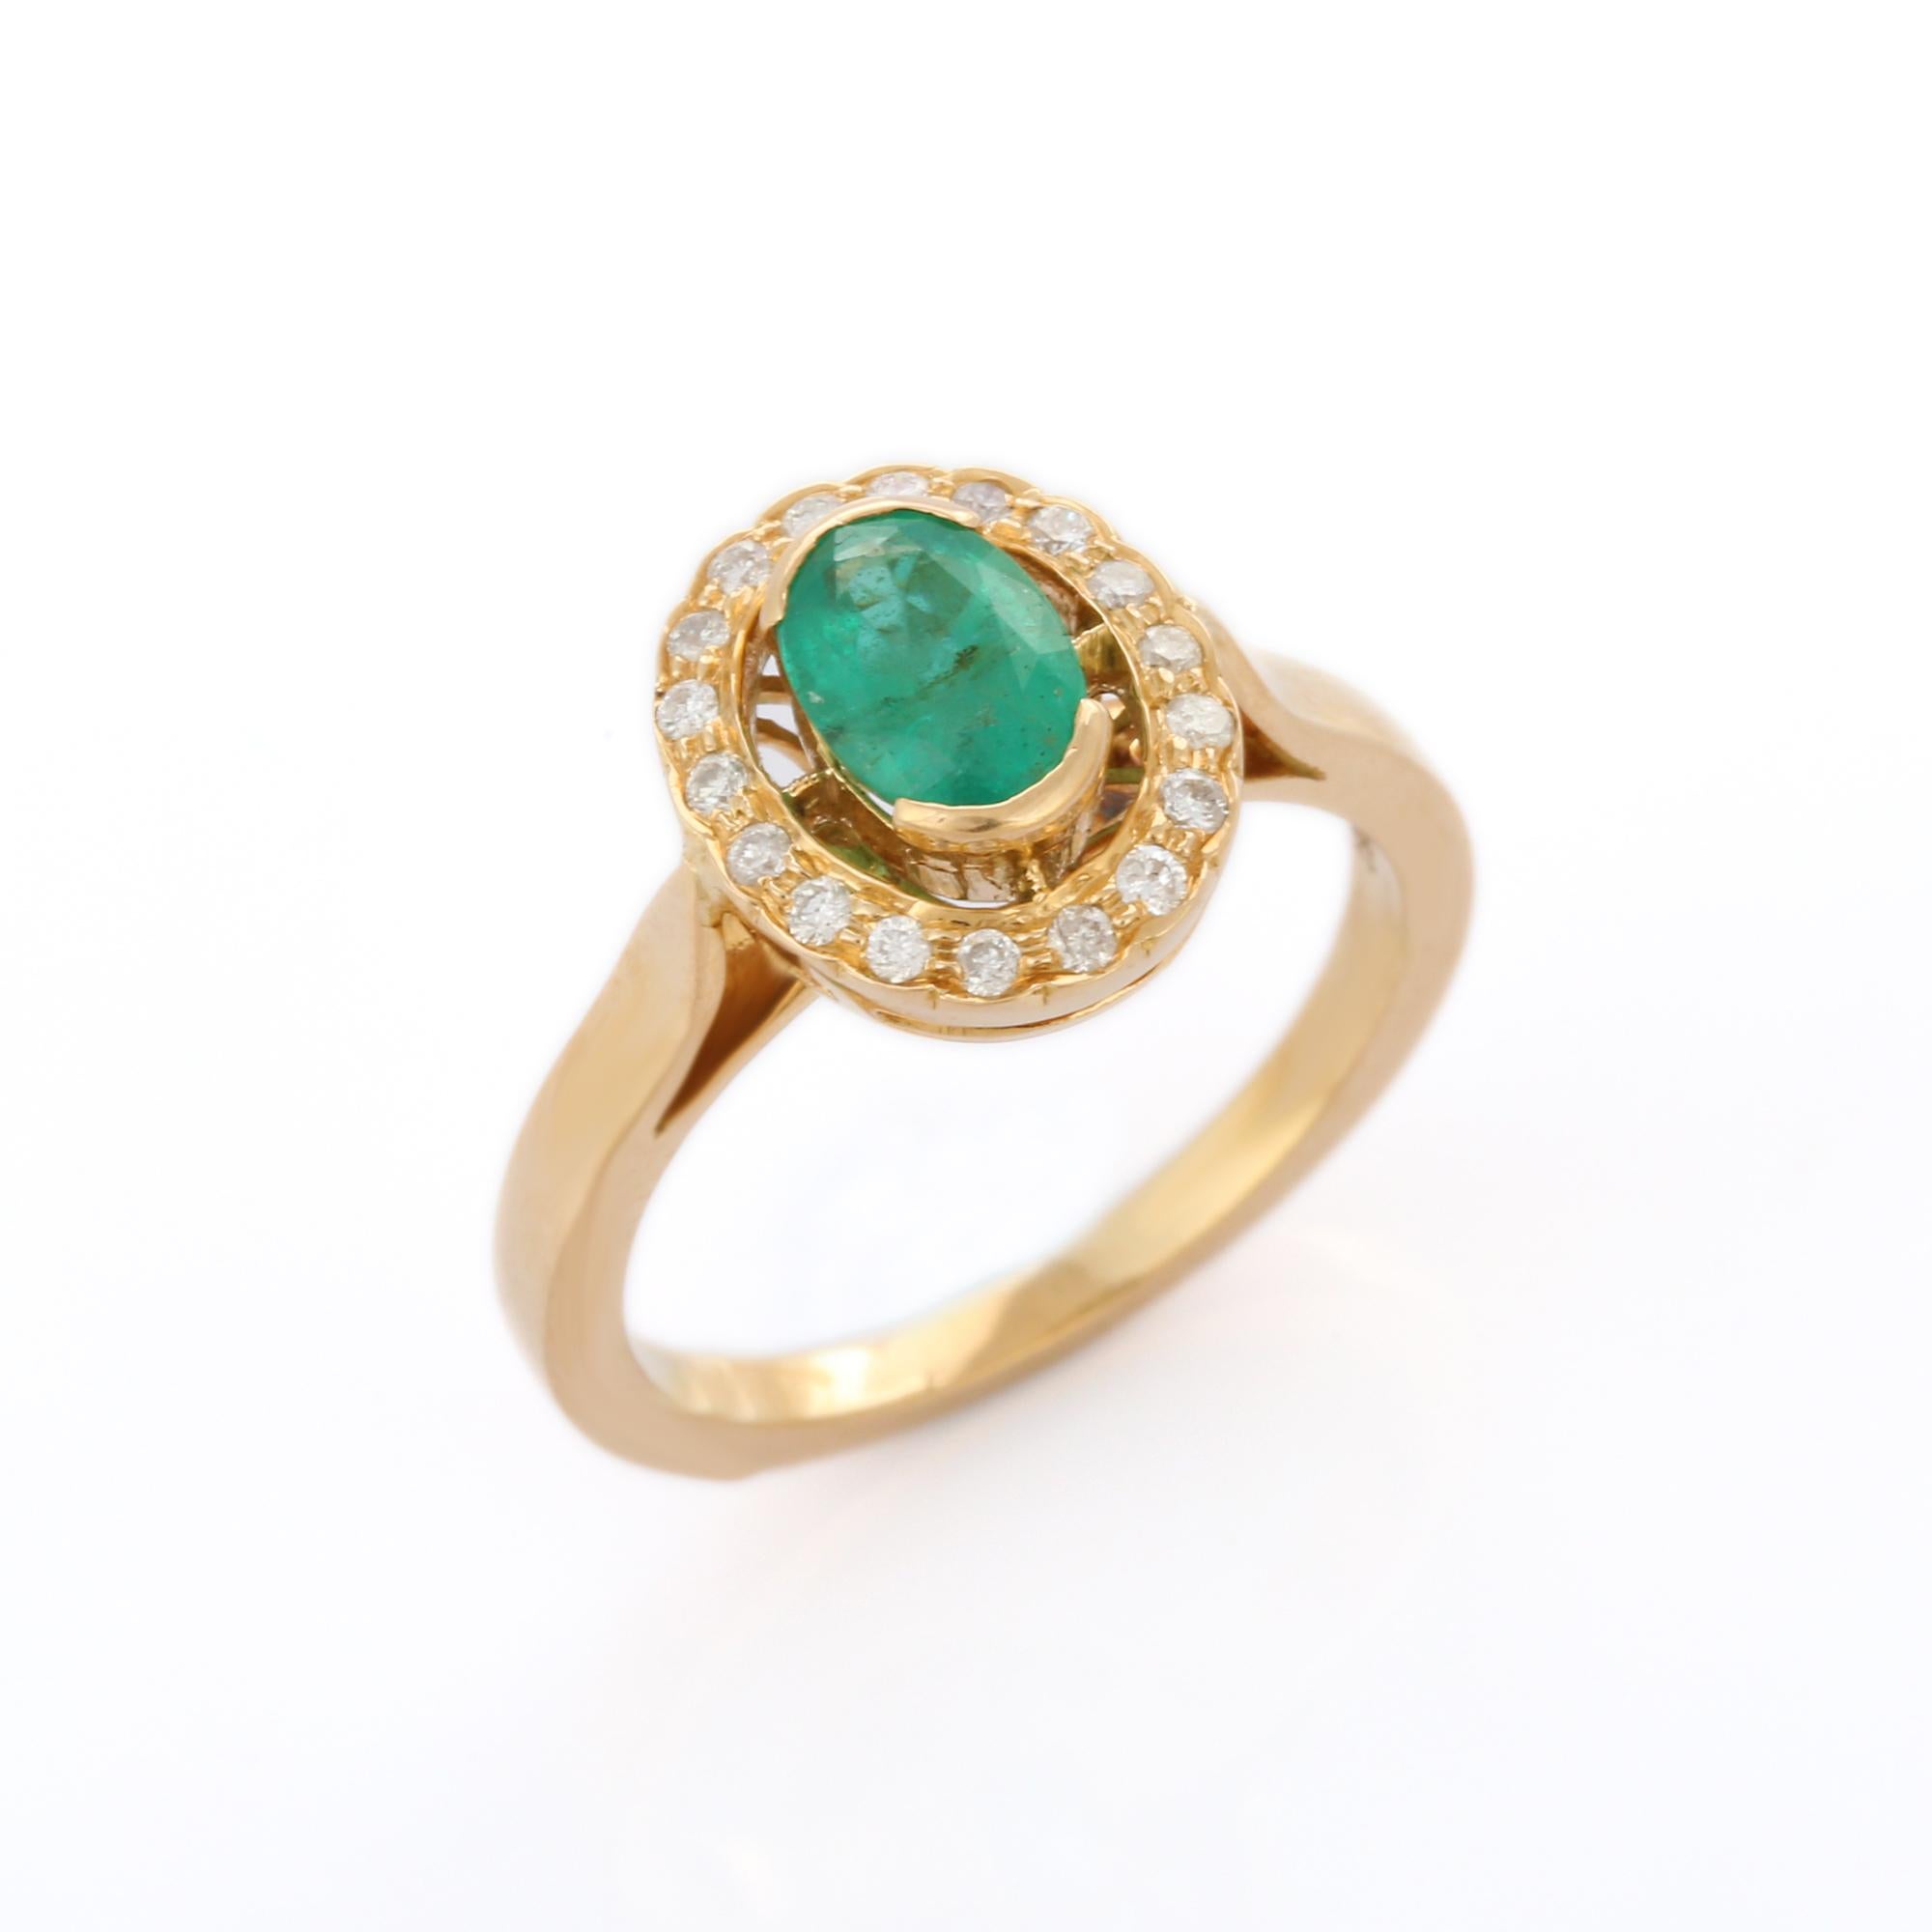 For Sale:  Contemporary Half Bezel Set Emerald and Halo Diamond Ring in 18K Yellow Gold 2